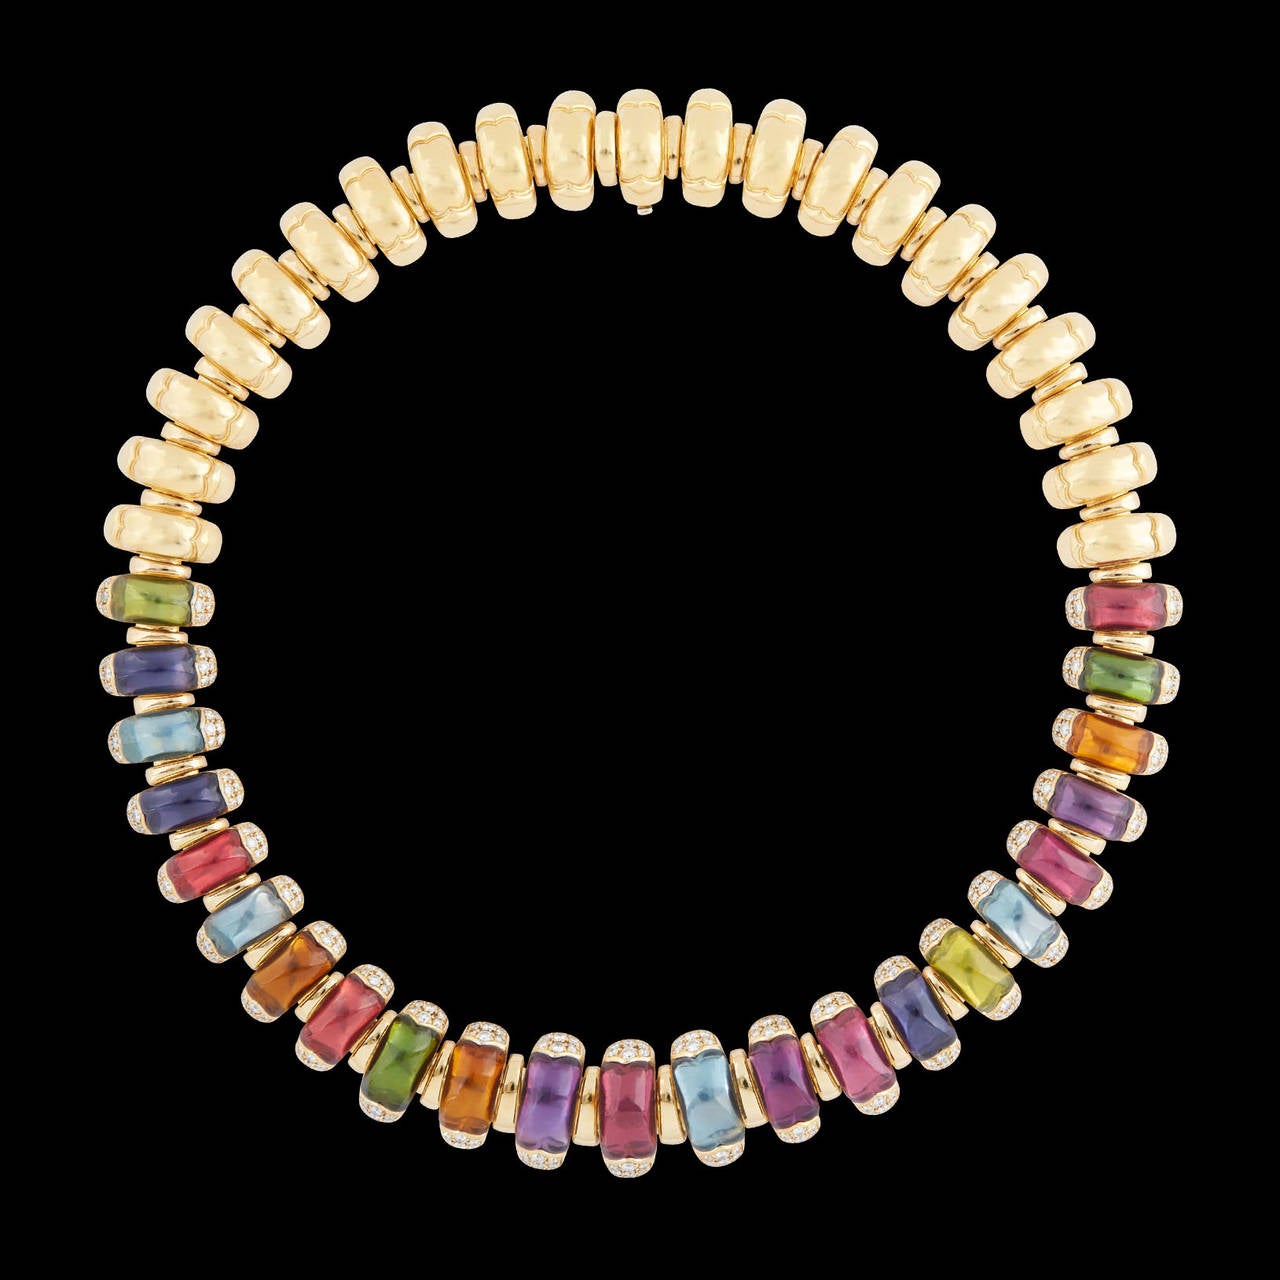 Stunning Bulgari 18Kt Yellow Gold Necklace of Arched Links in an Array of Vibrant Colors with approximately 2.90 carat total weight of round brilliant cut diamonds and 44.00 carat total weight of Semi Precious Gemstones. The necklace measures 15